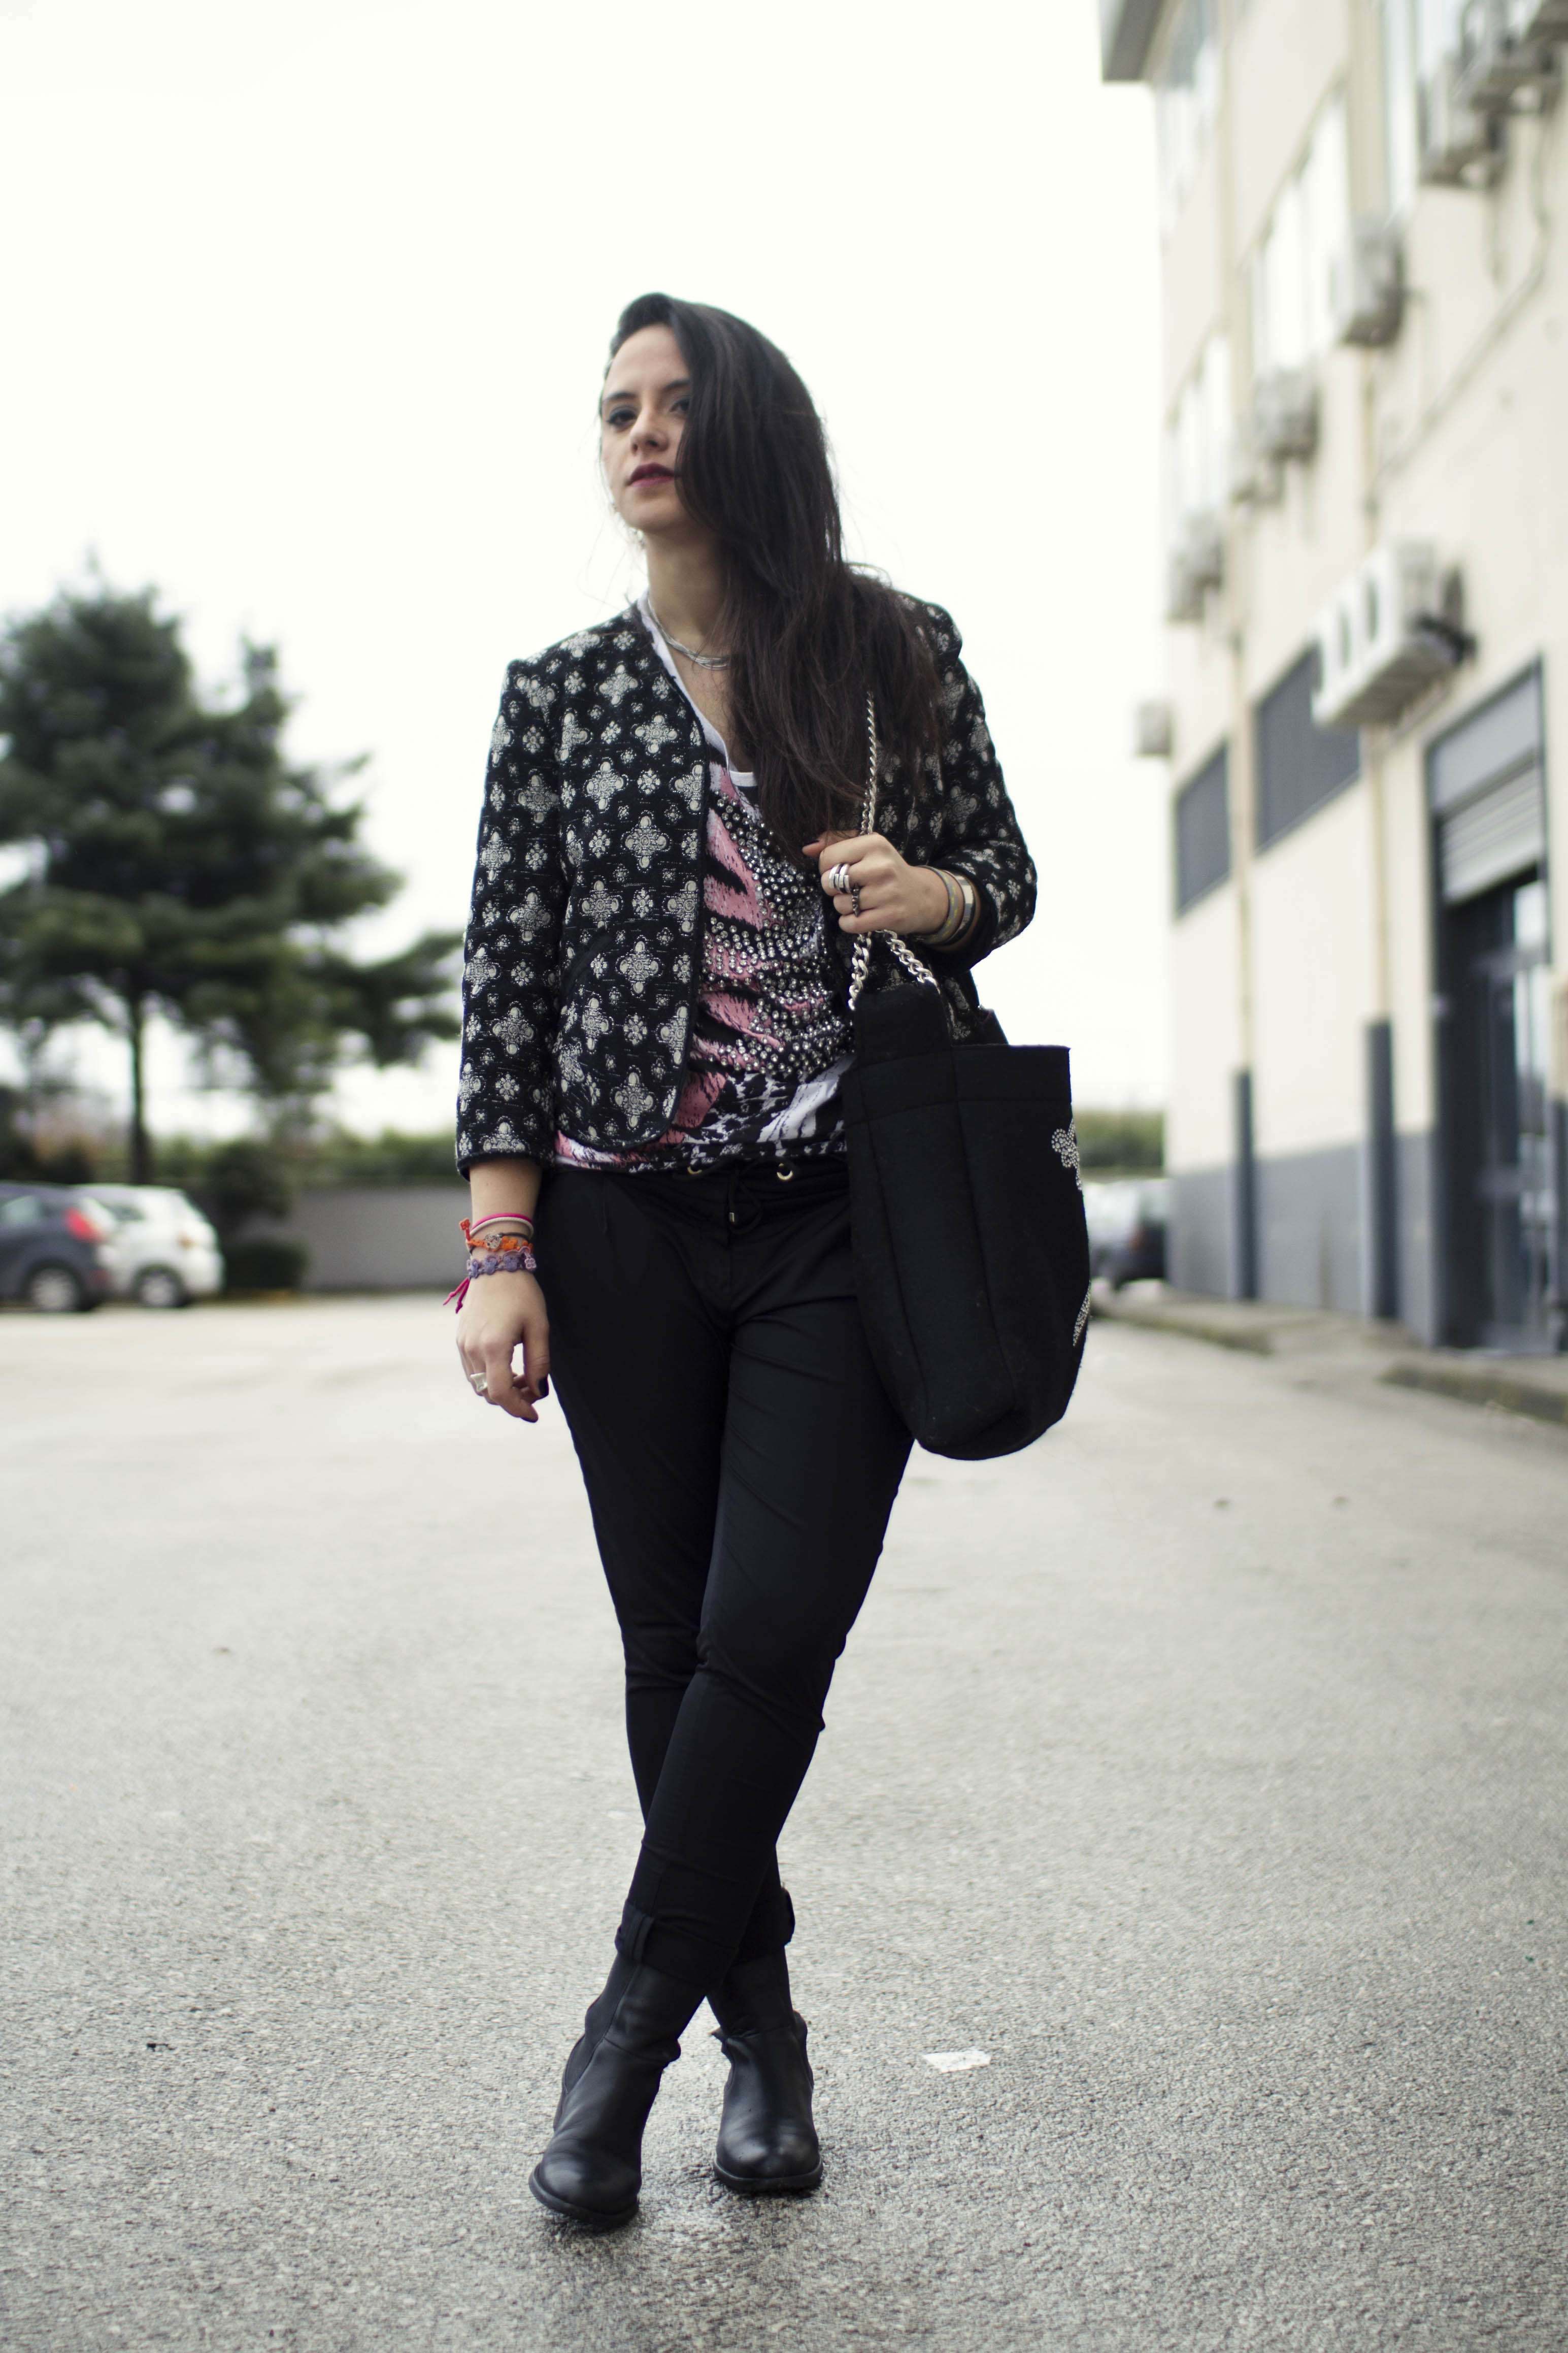 Pinko cross jacket and skull bag outfit